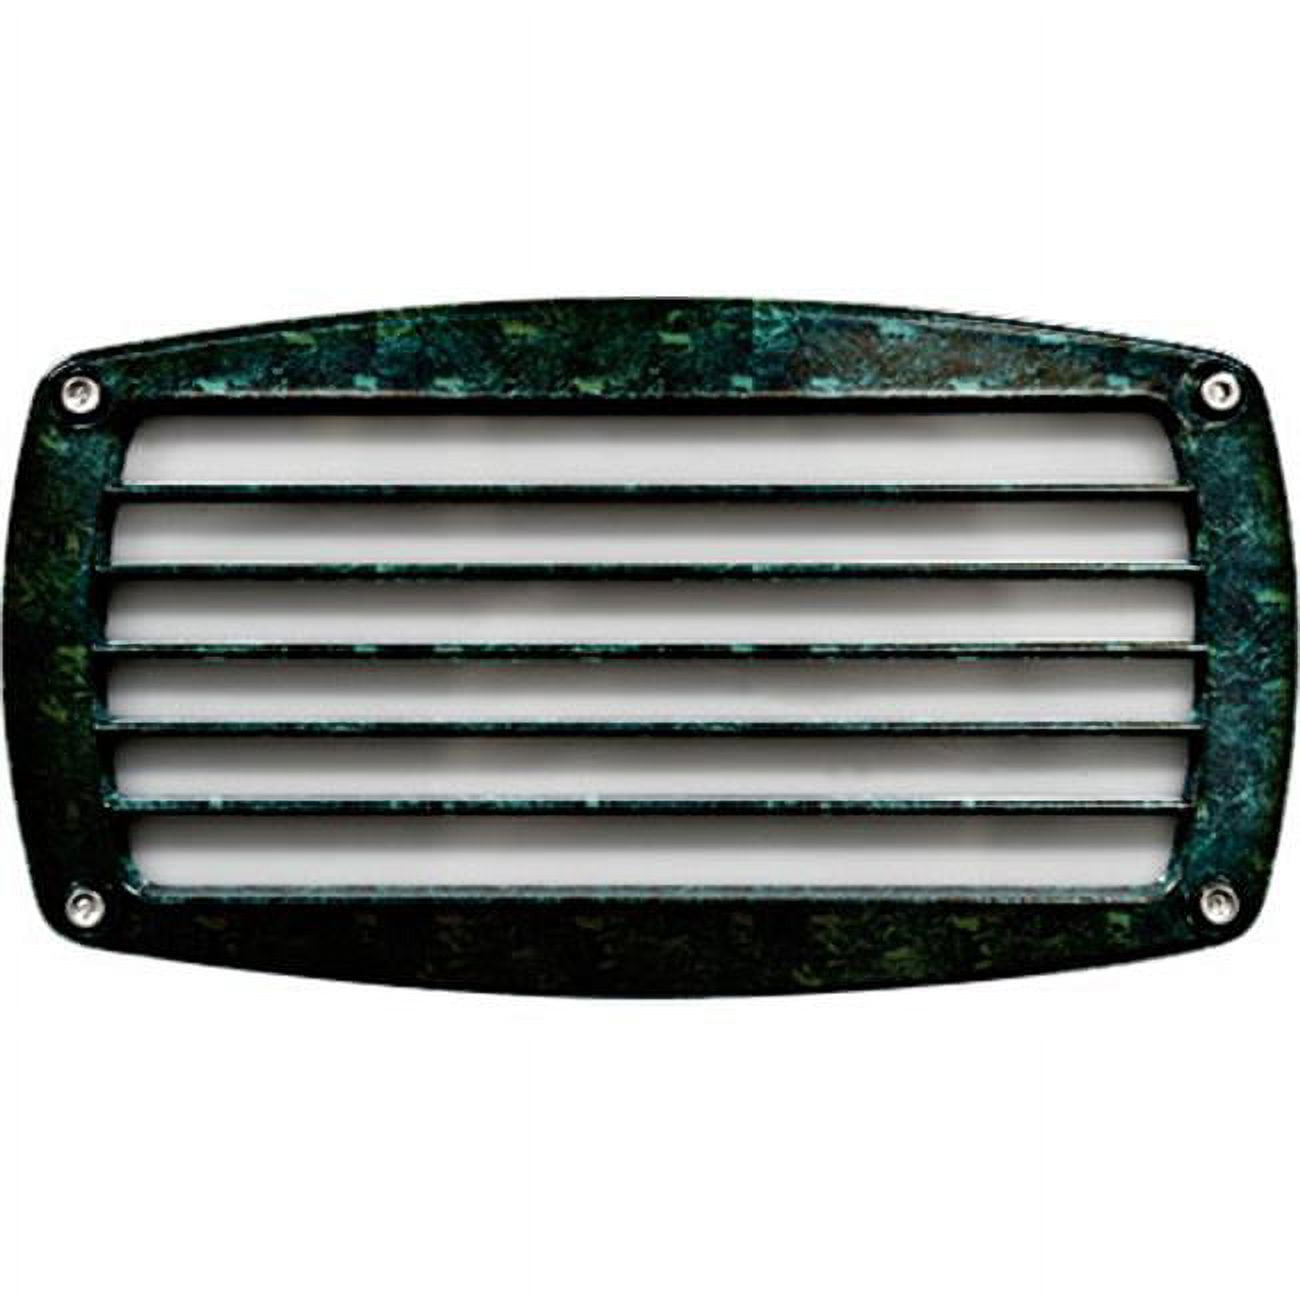 Picture of Dabmar Lighting DSL1015-VG Recessed Louvered Brick, Step & Wall Light, Verde Green - 5 x 9 x 3.75 in.